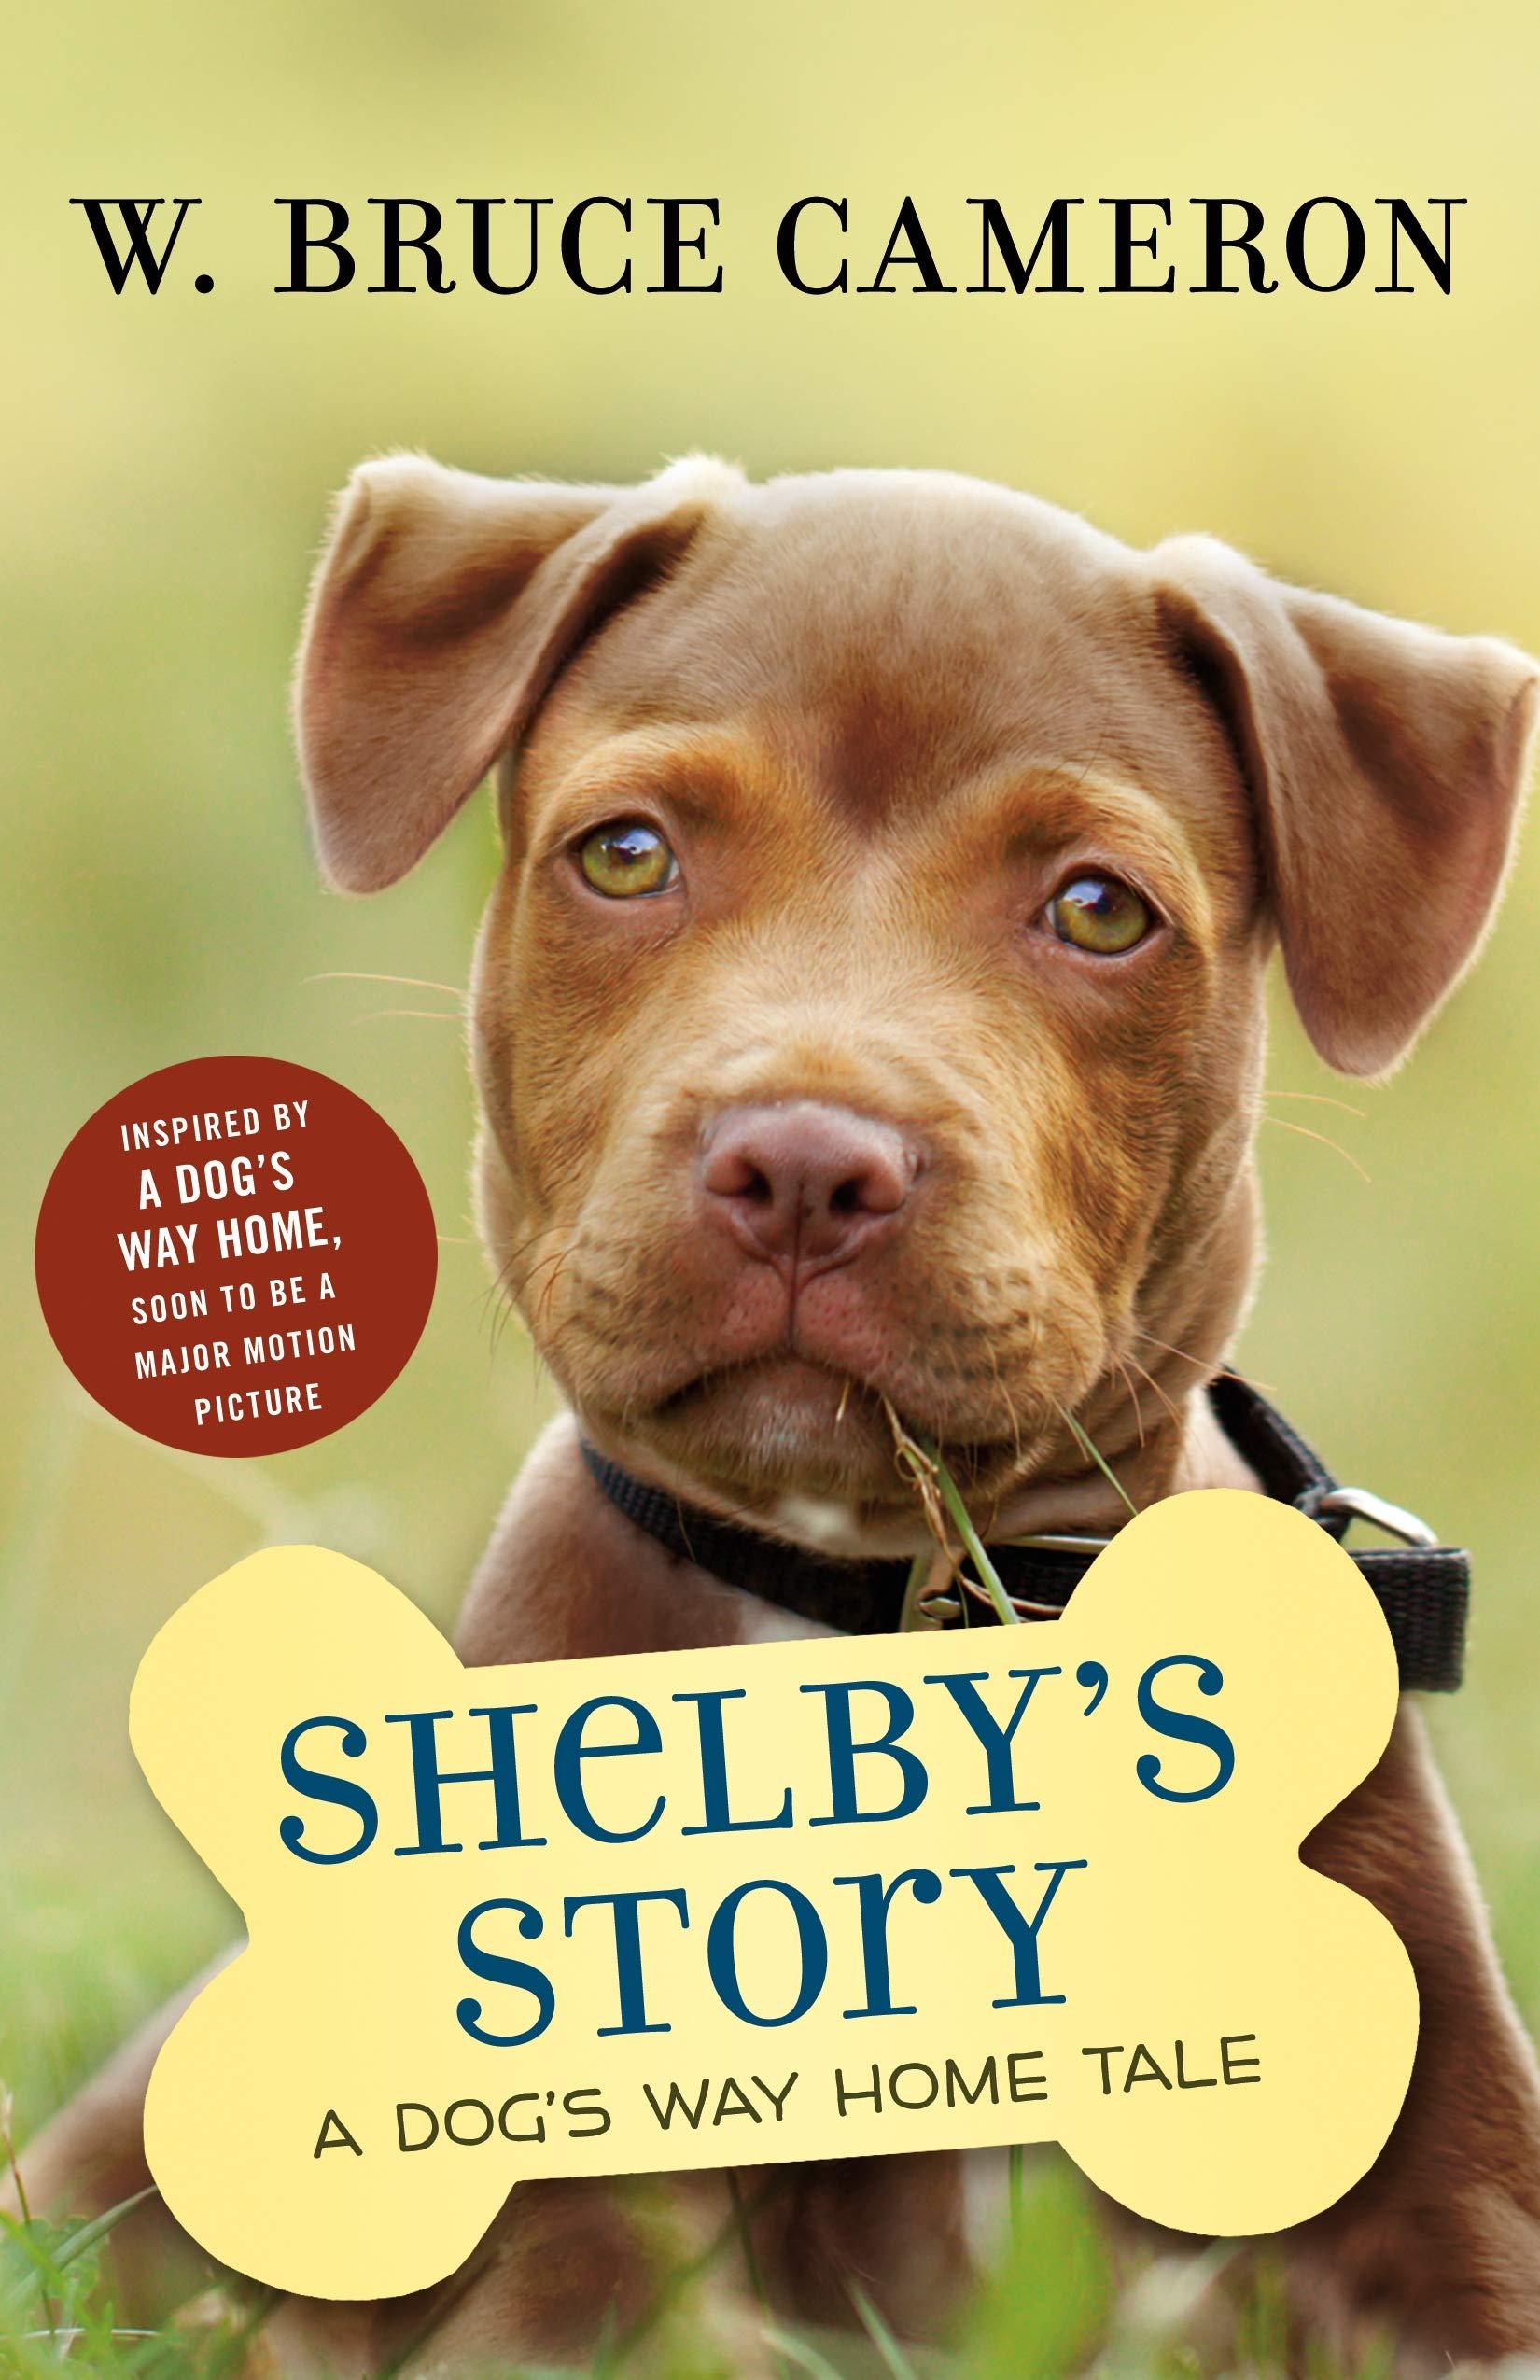 Shelby's Story: A Dog's Way Home Tale Dog's Purpose